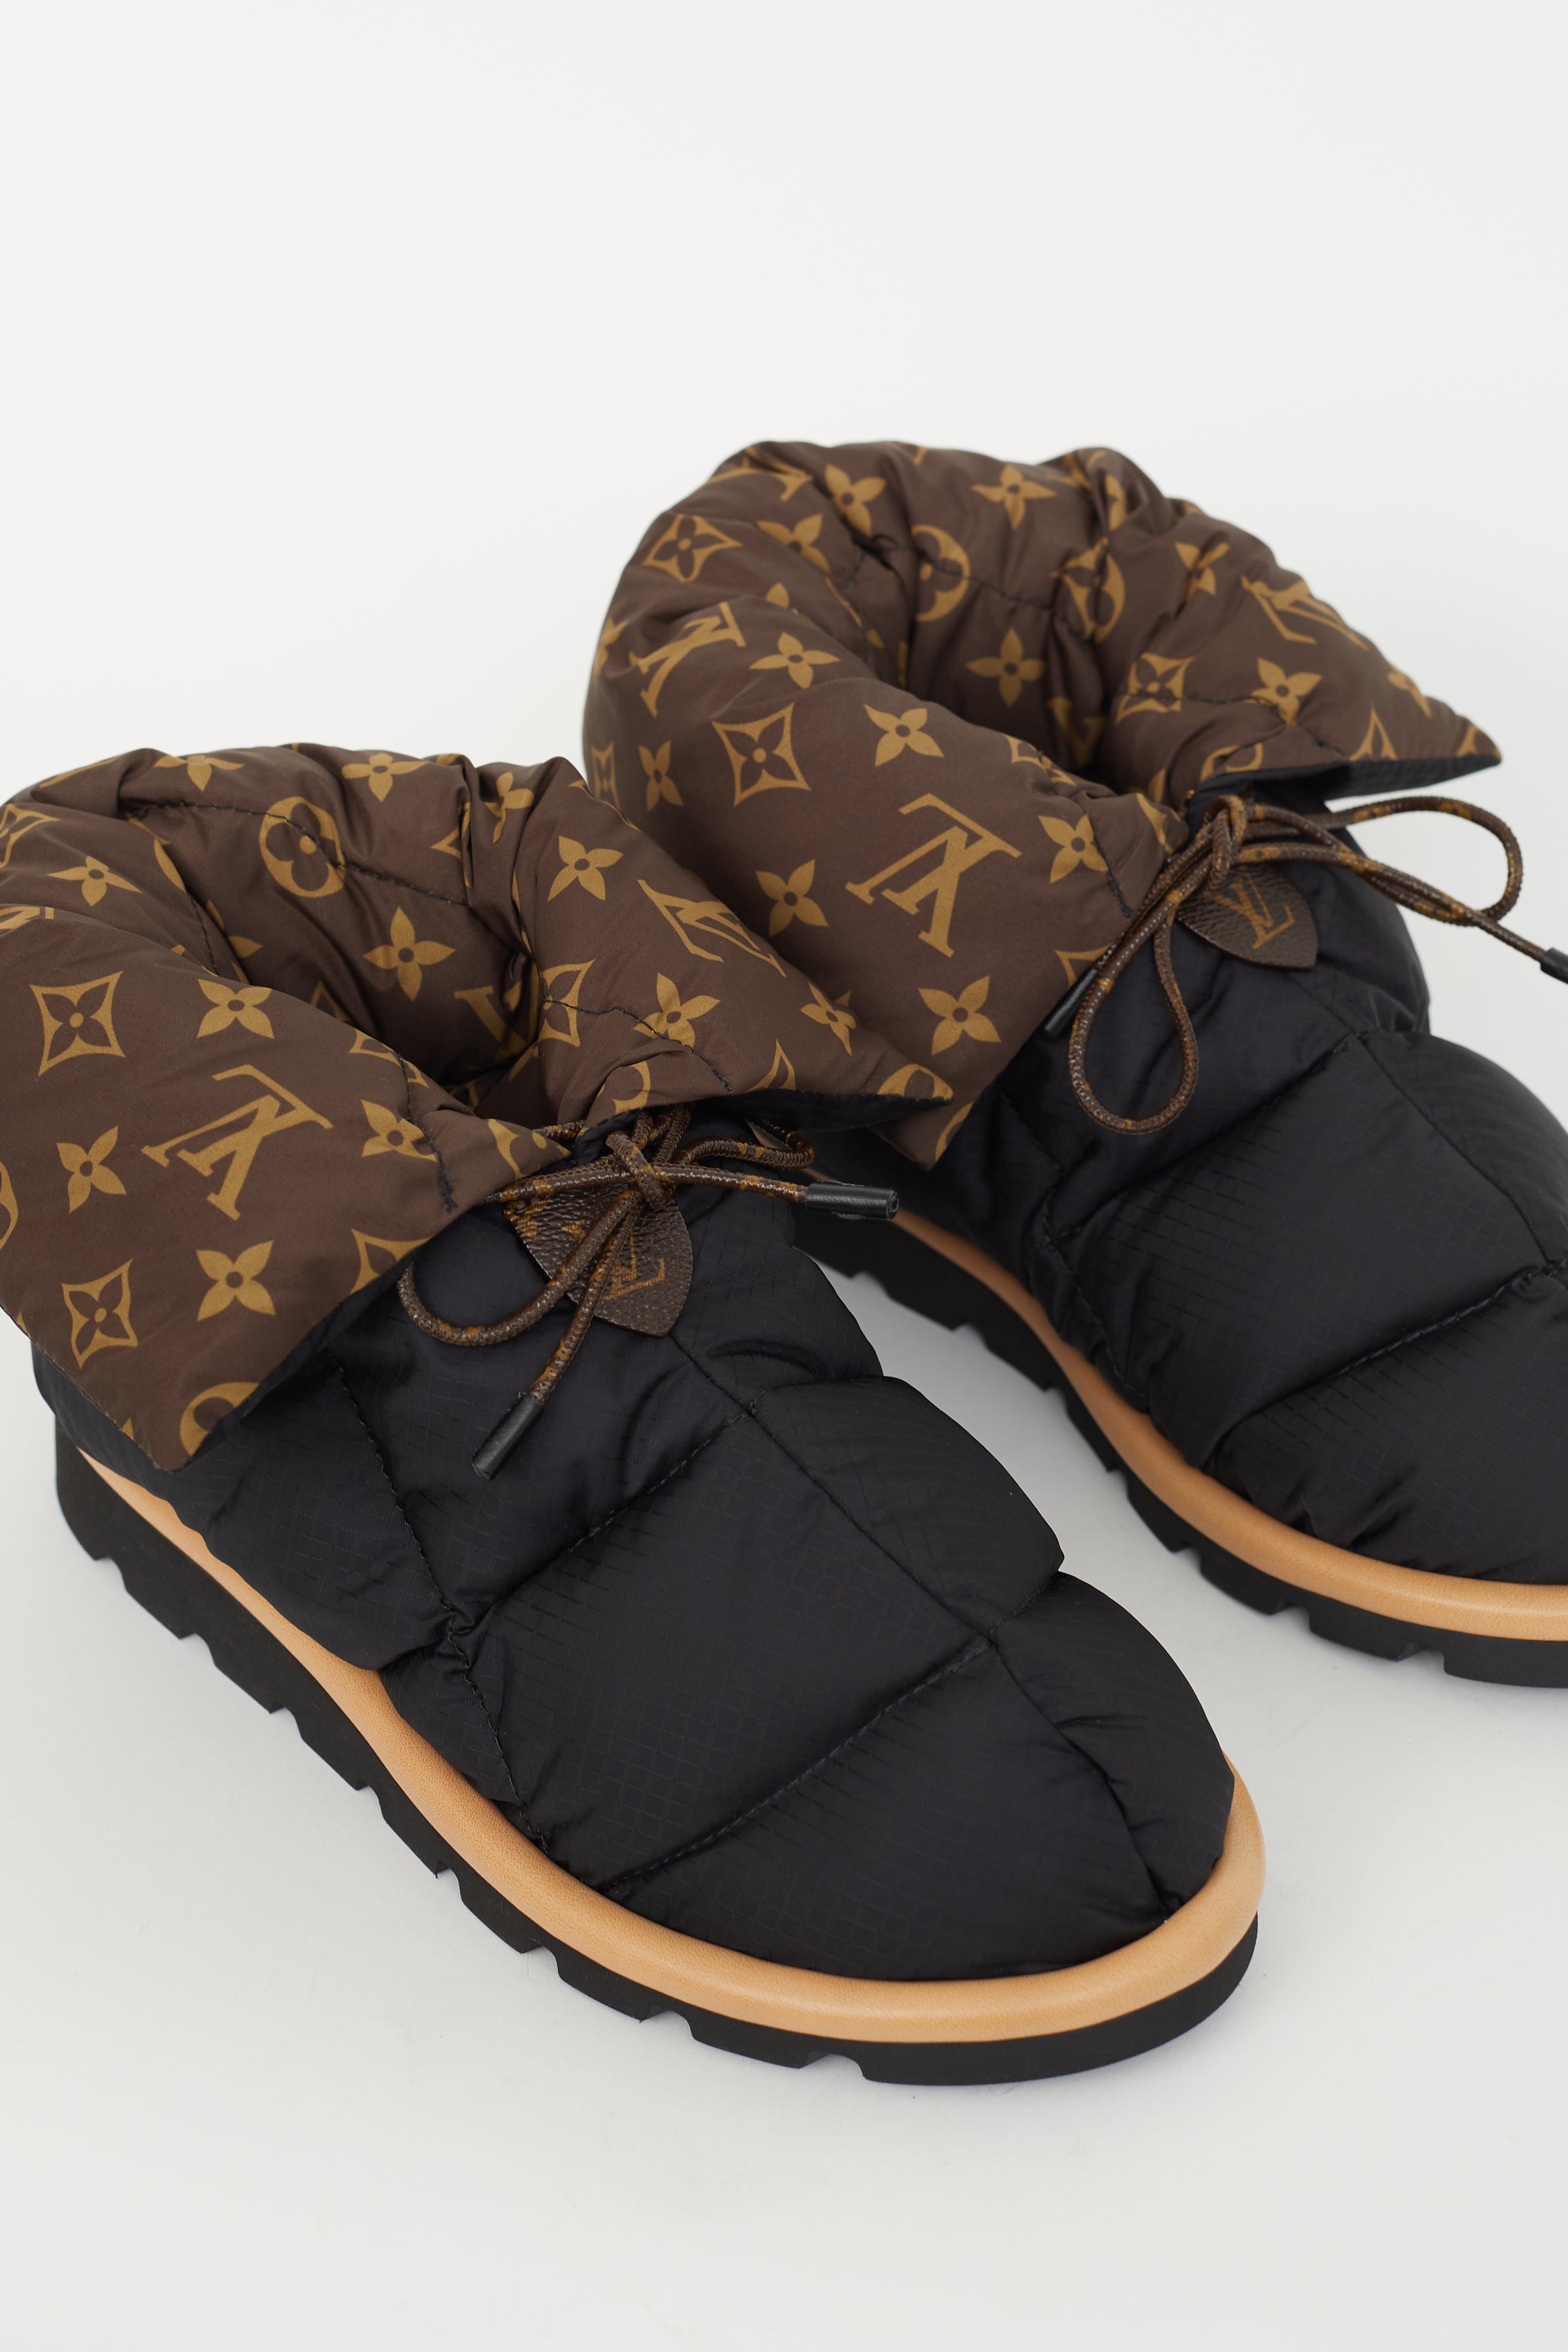 Louis Vuitton Pillow Boots Are The Puffer Shoes All Over Instagram